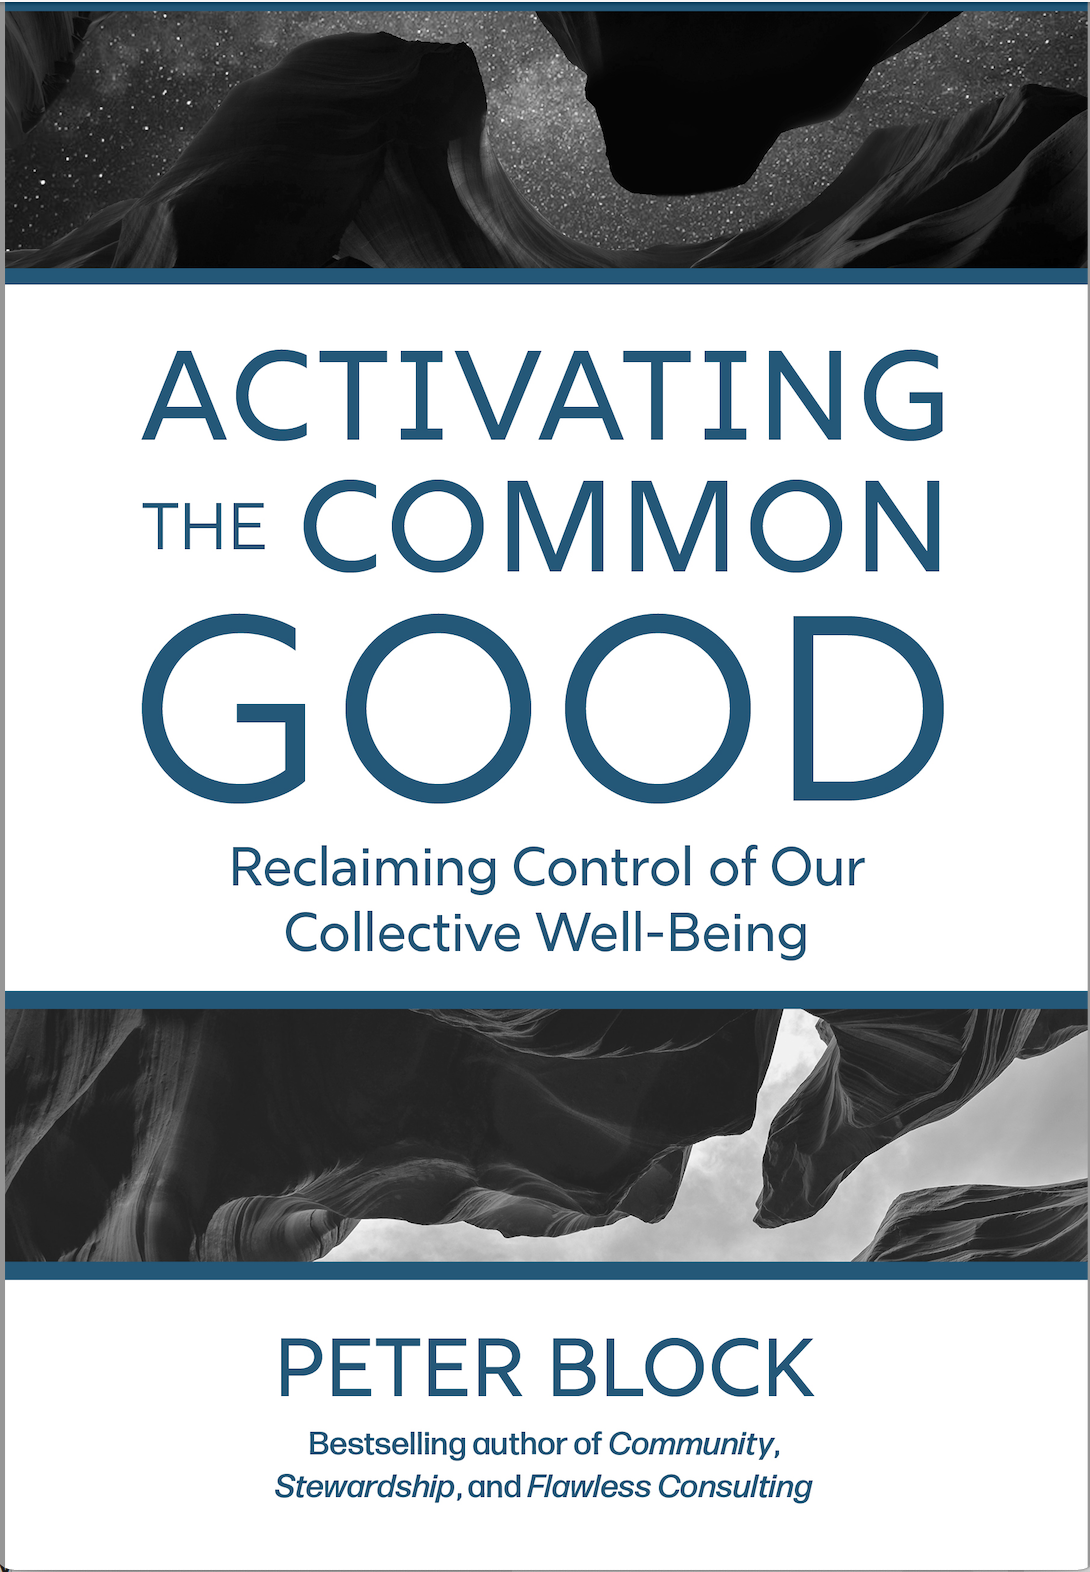 Activating the Common Good